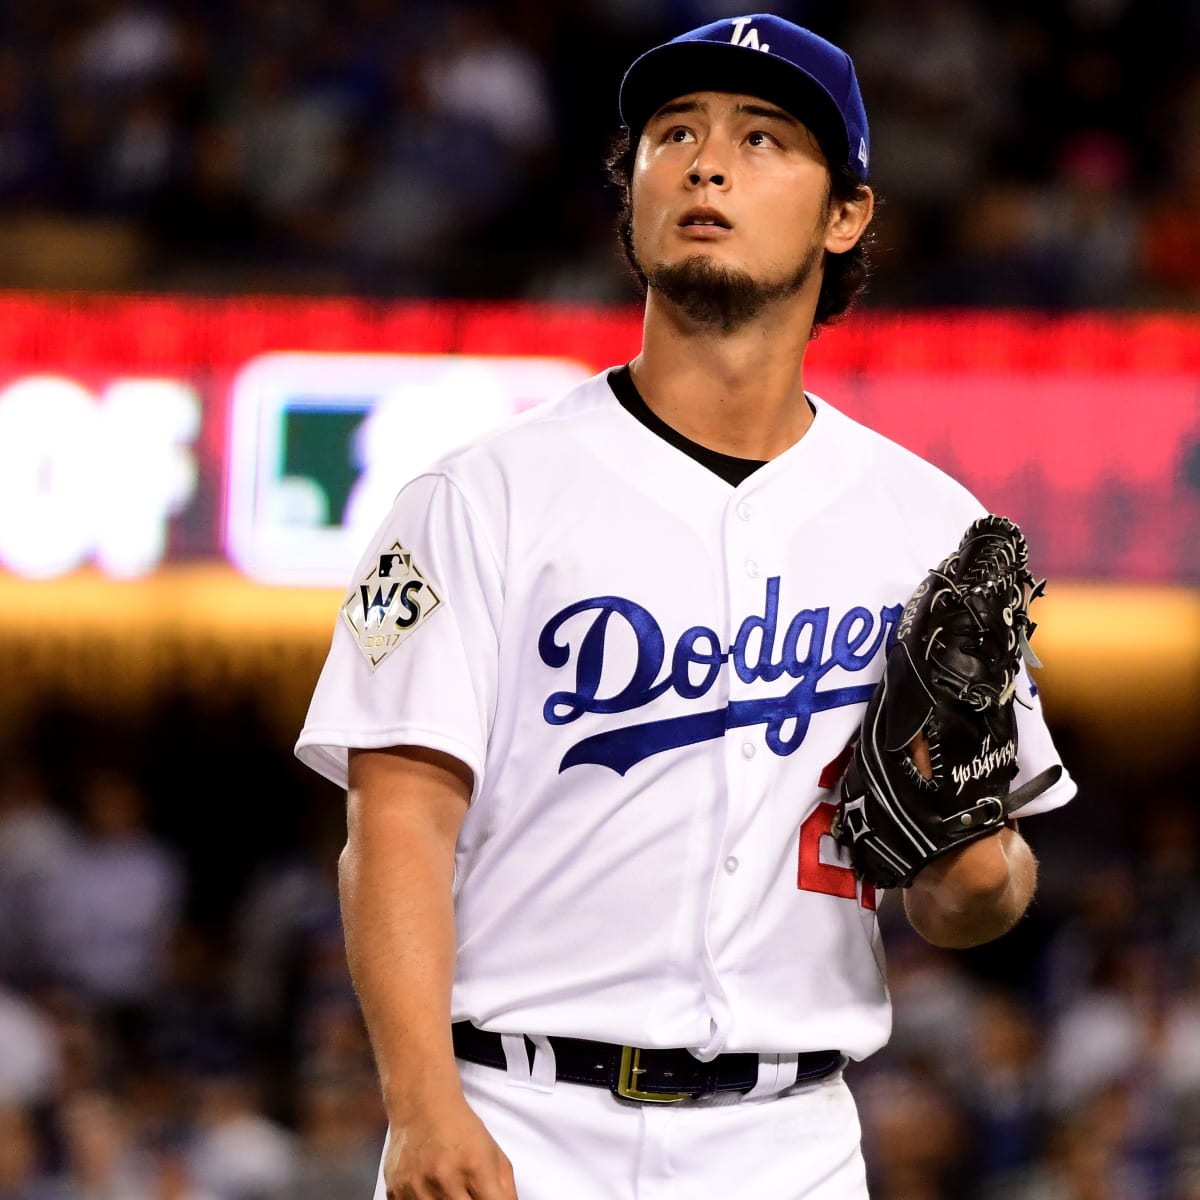 Cubs Pitcher Yu Darvish Says Astros Should Be Stripped of '17